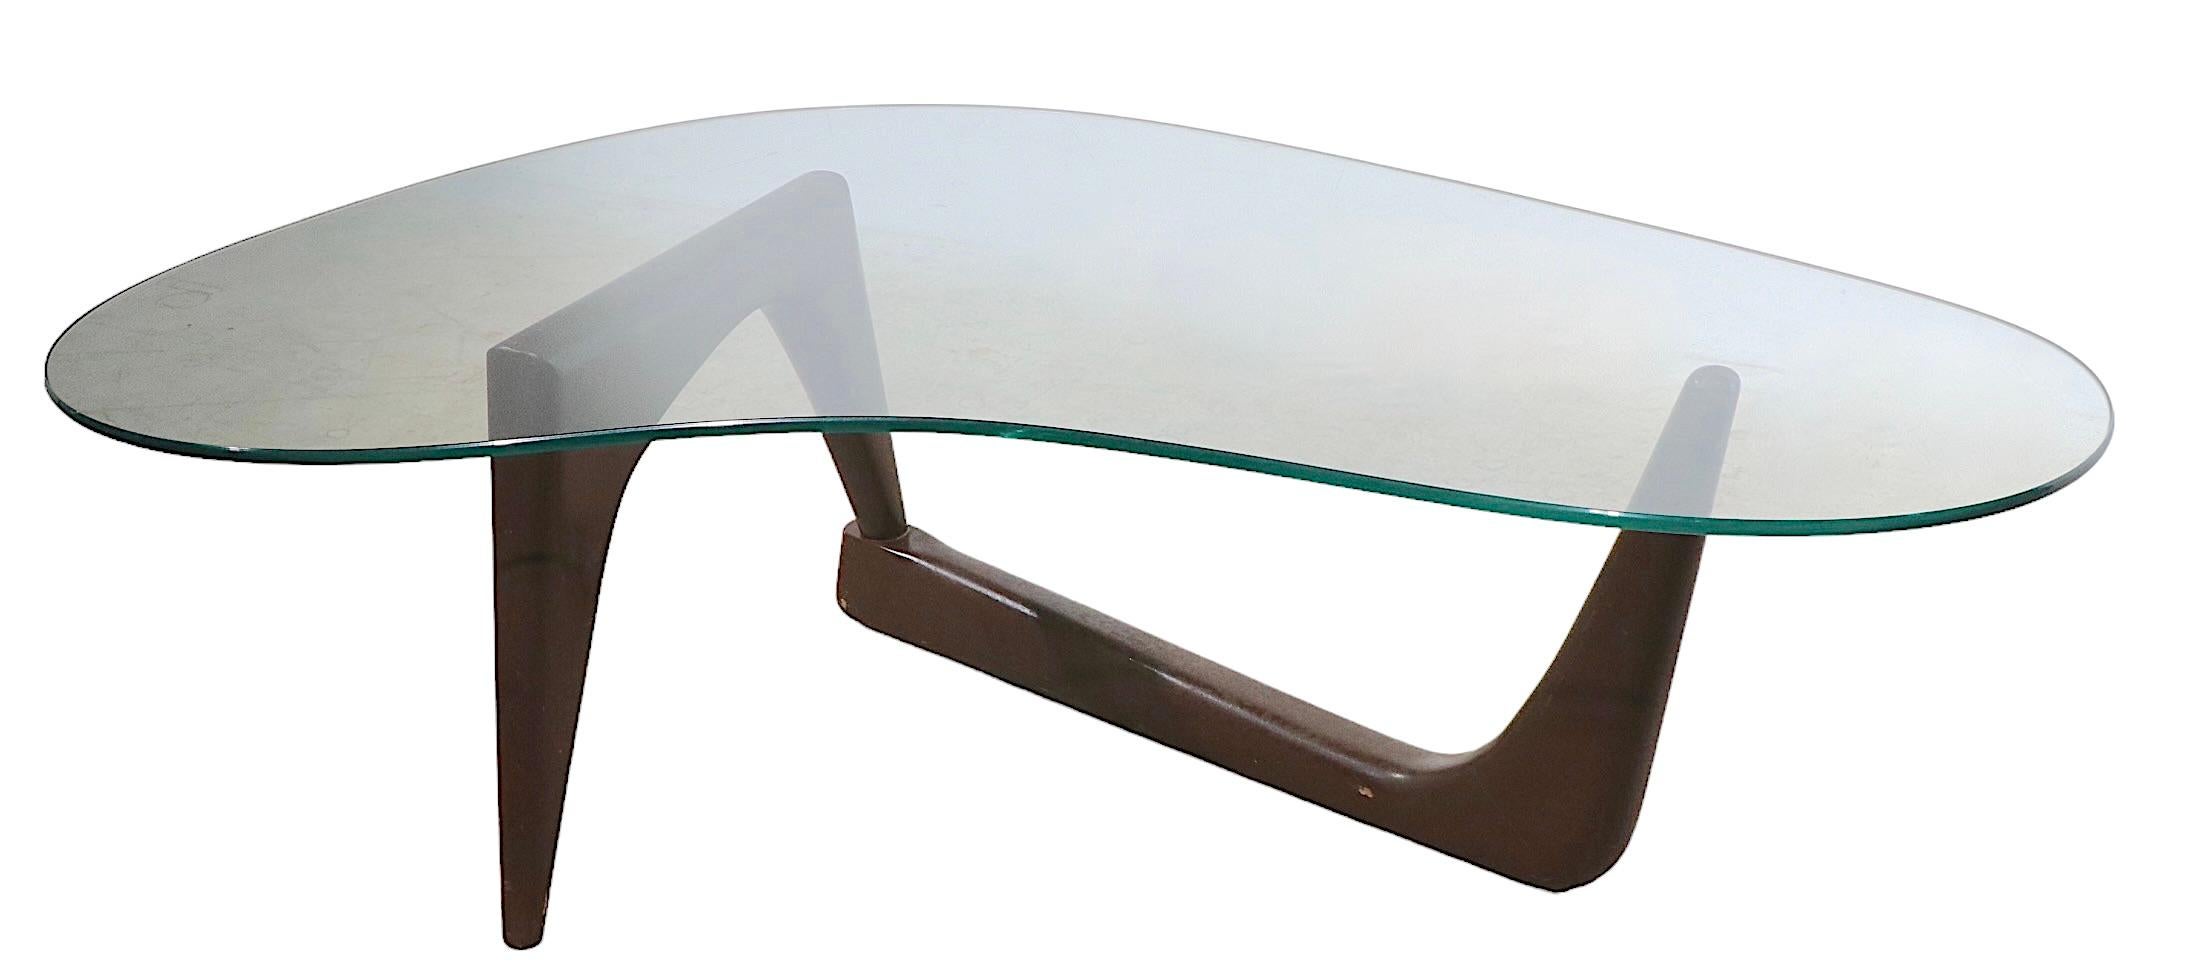 Classic mid century free form glass top coffee table with sculptural wood base and amoeba form glass top. The base is constructed of solid wood, and is flexible at the connection joint, it is in later, but not new, brown paint finish. The thick